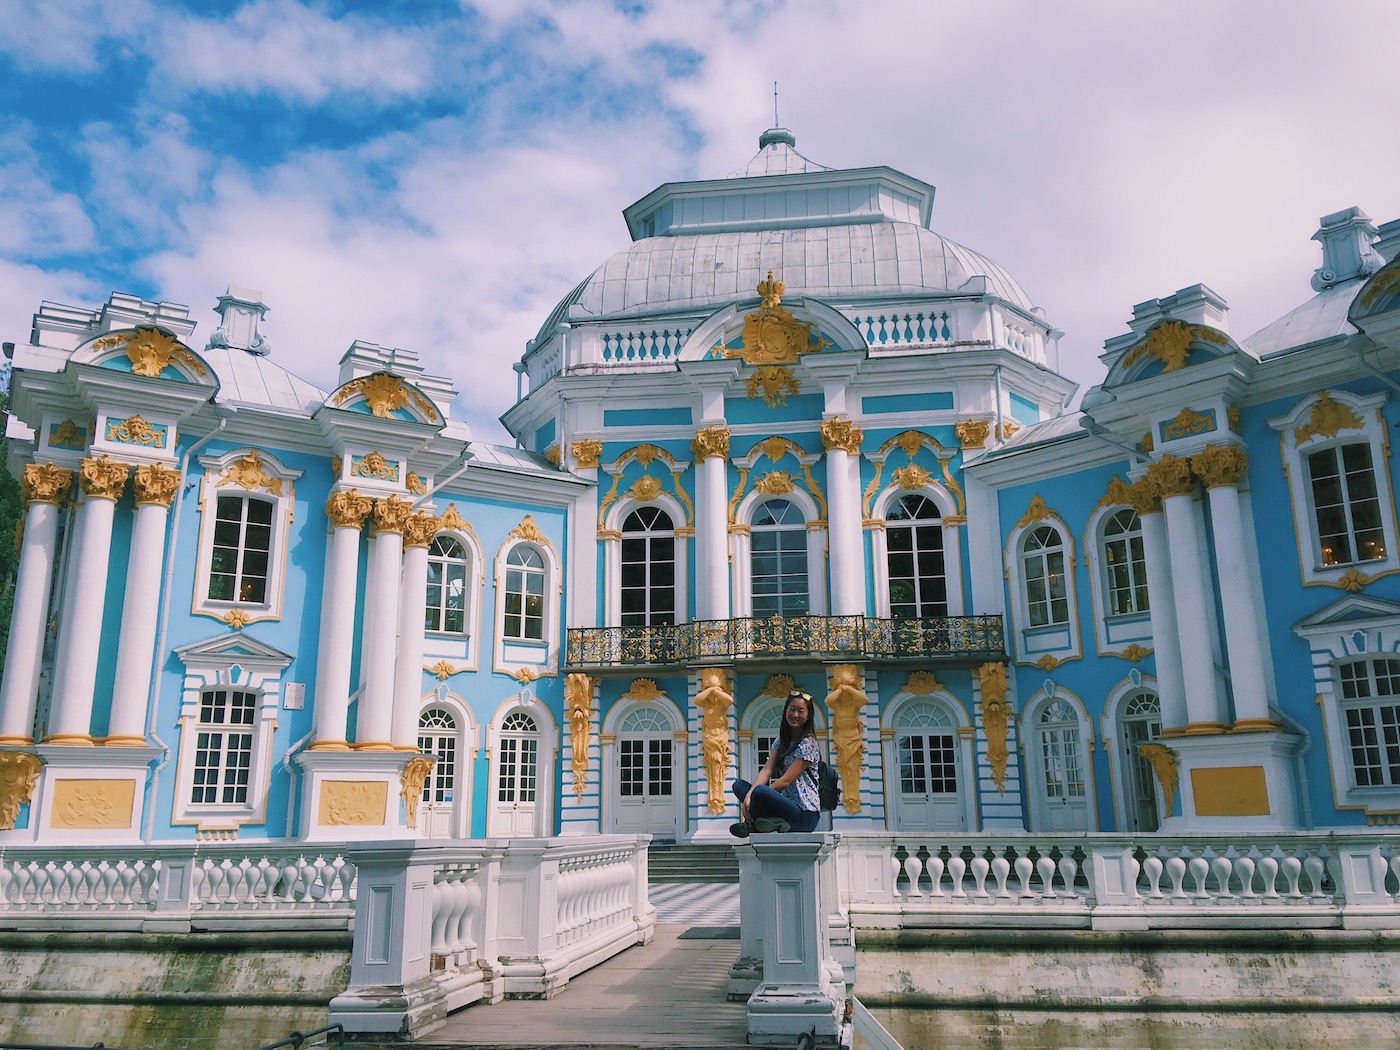 Catherine Palace: ornate palace painted in sky blue and white with gold accents